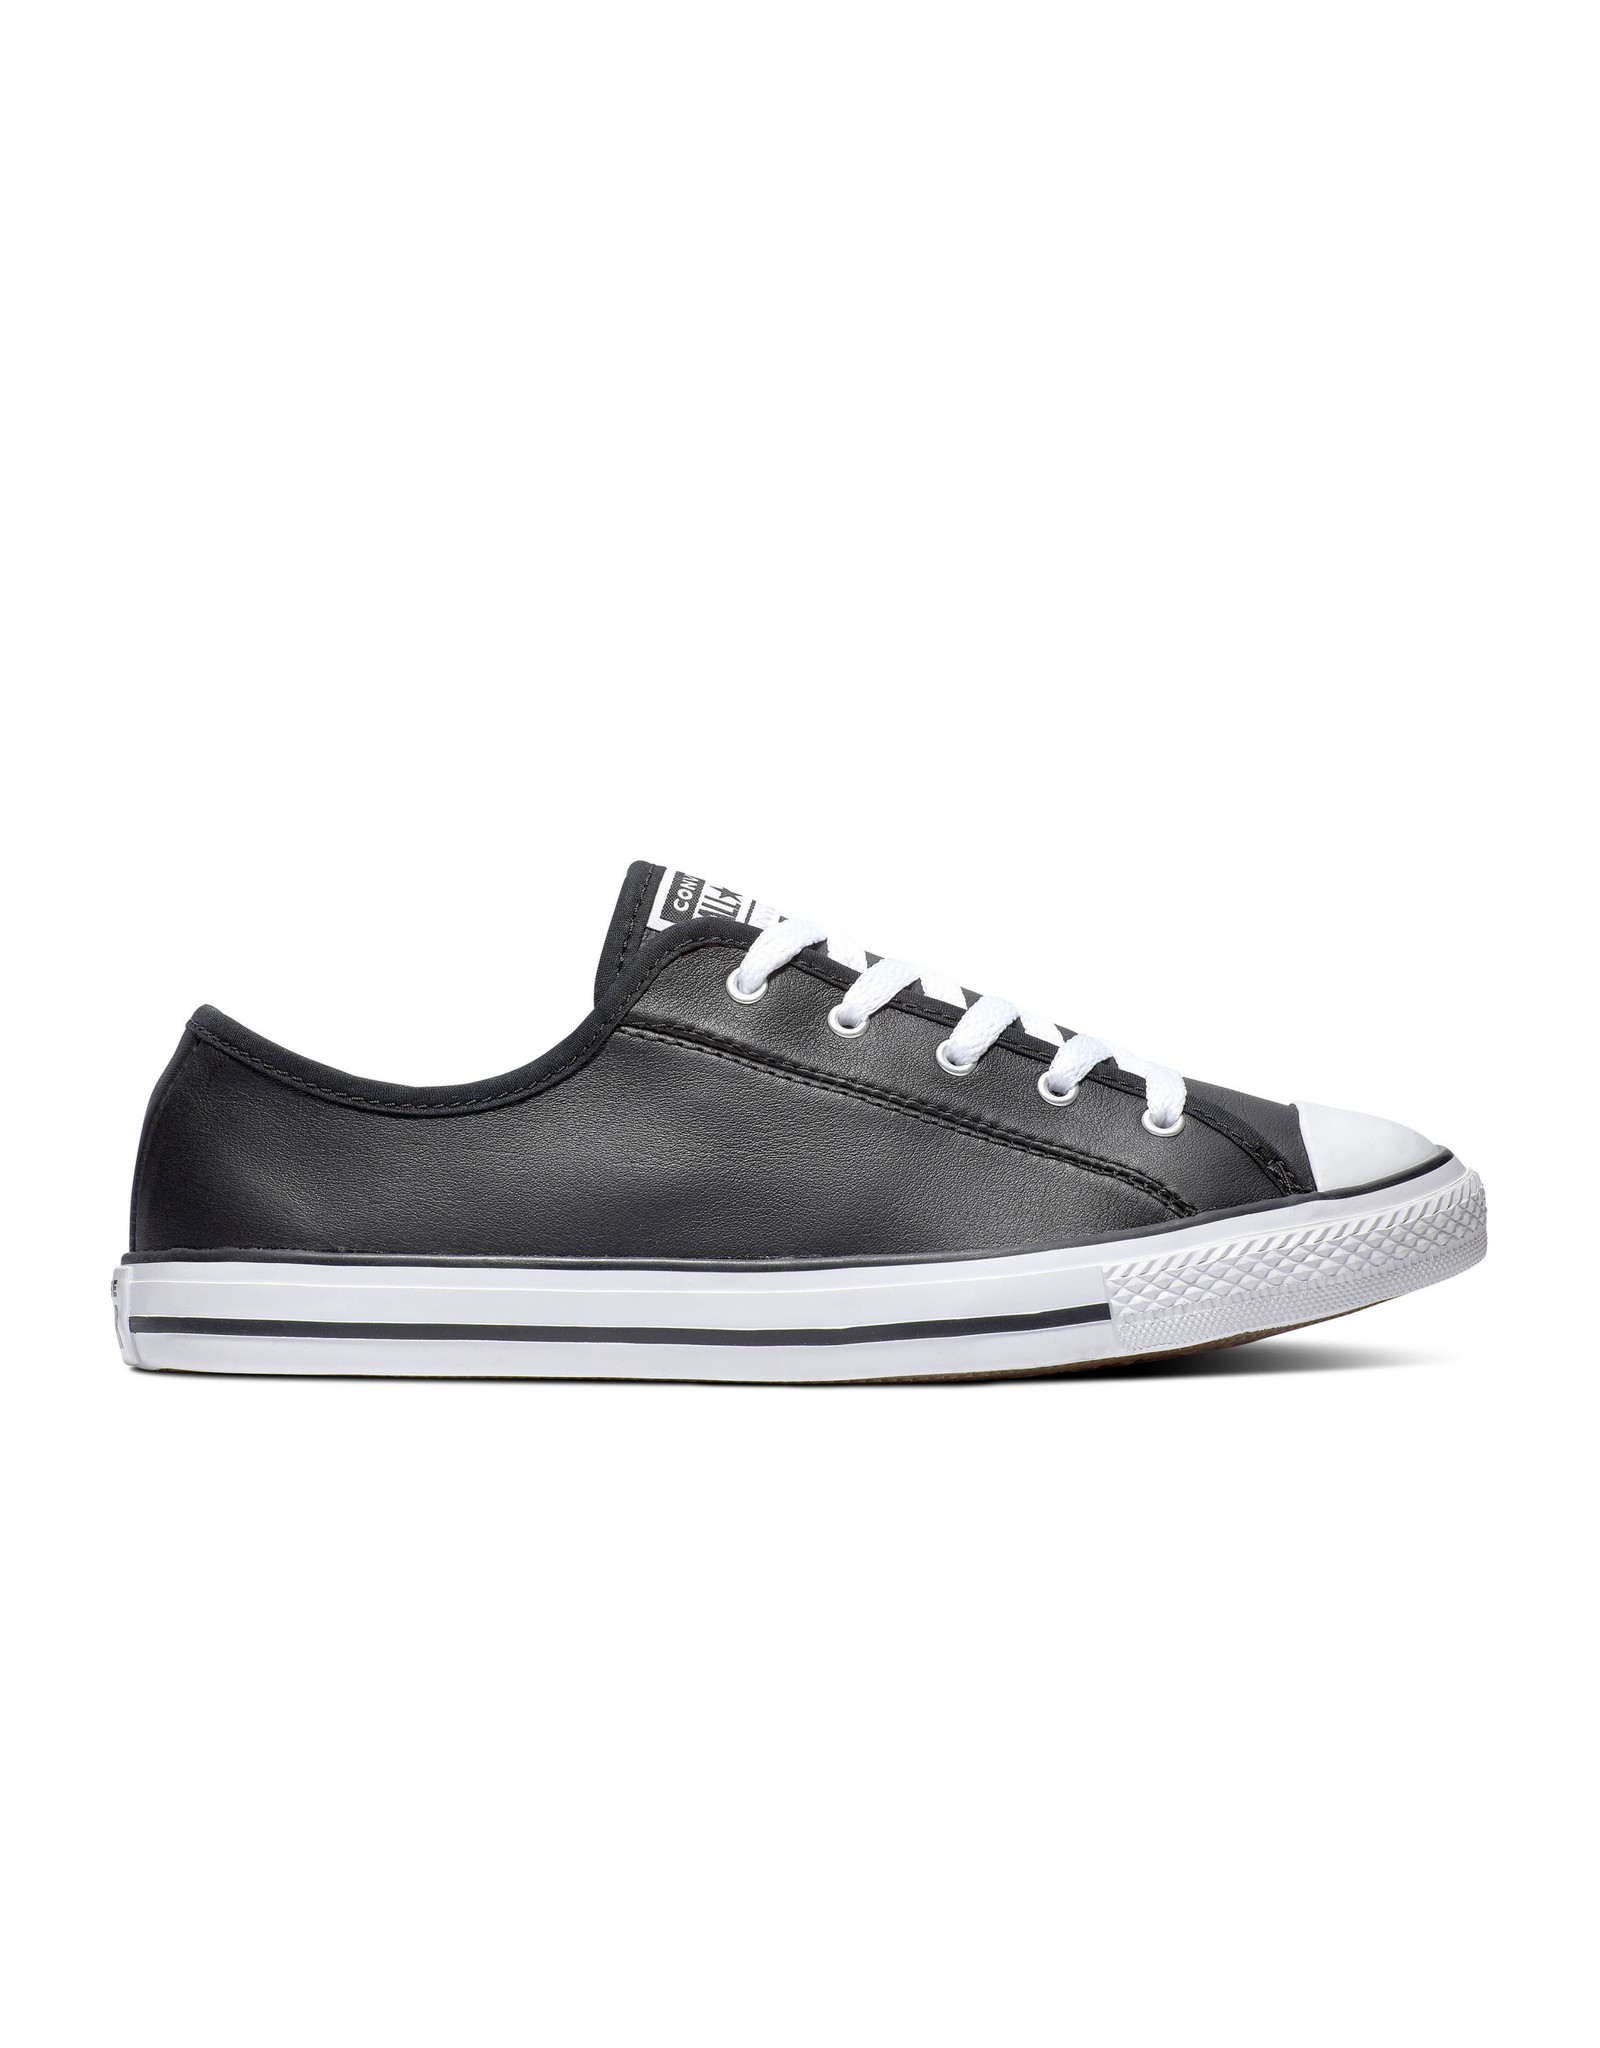 converse chuck taylor all star dainty ox leather shoes